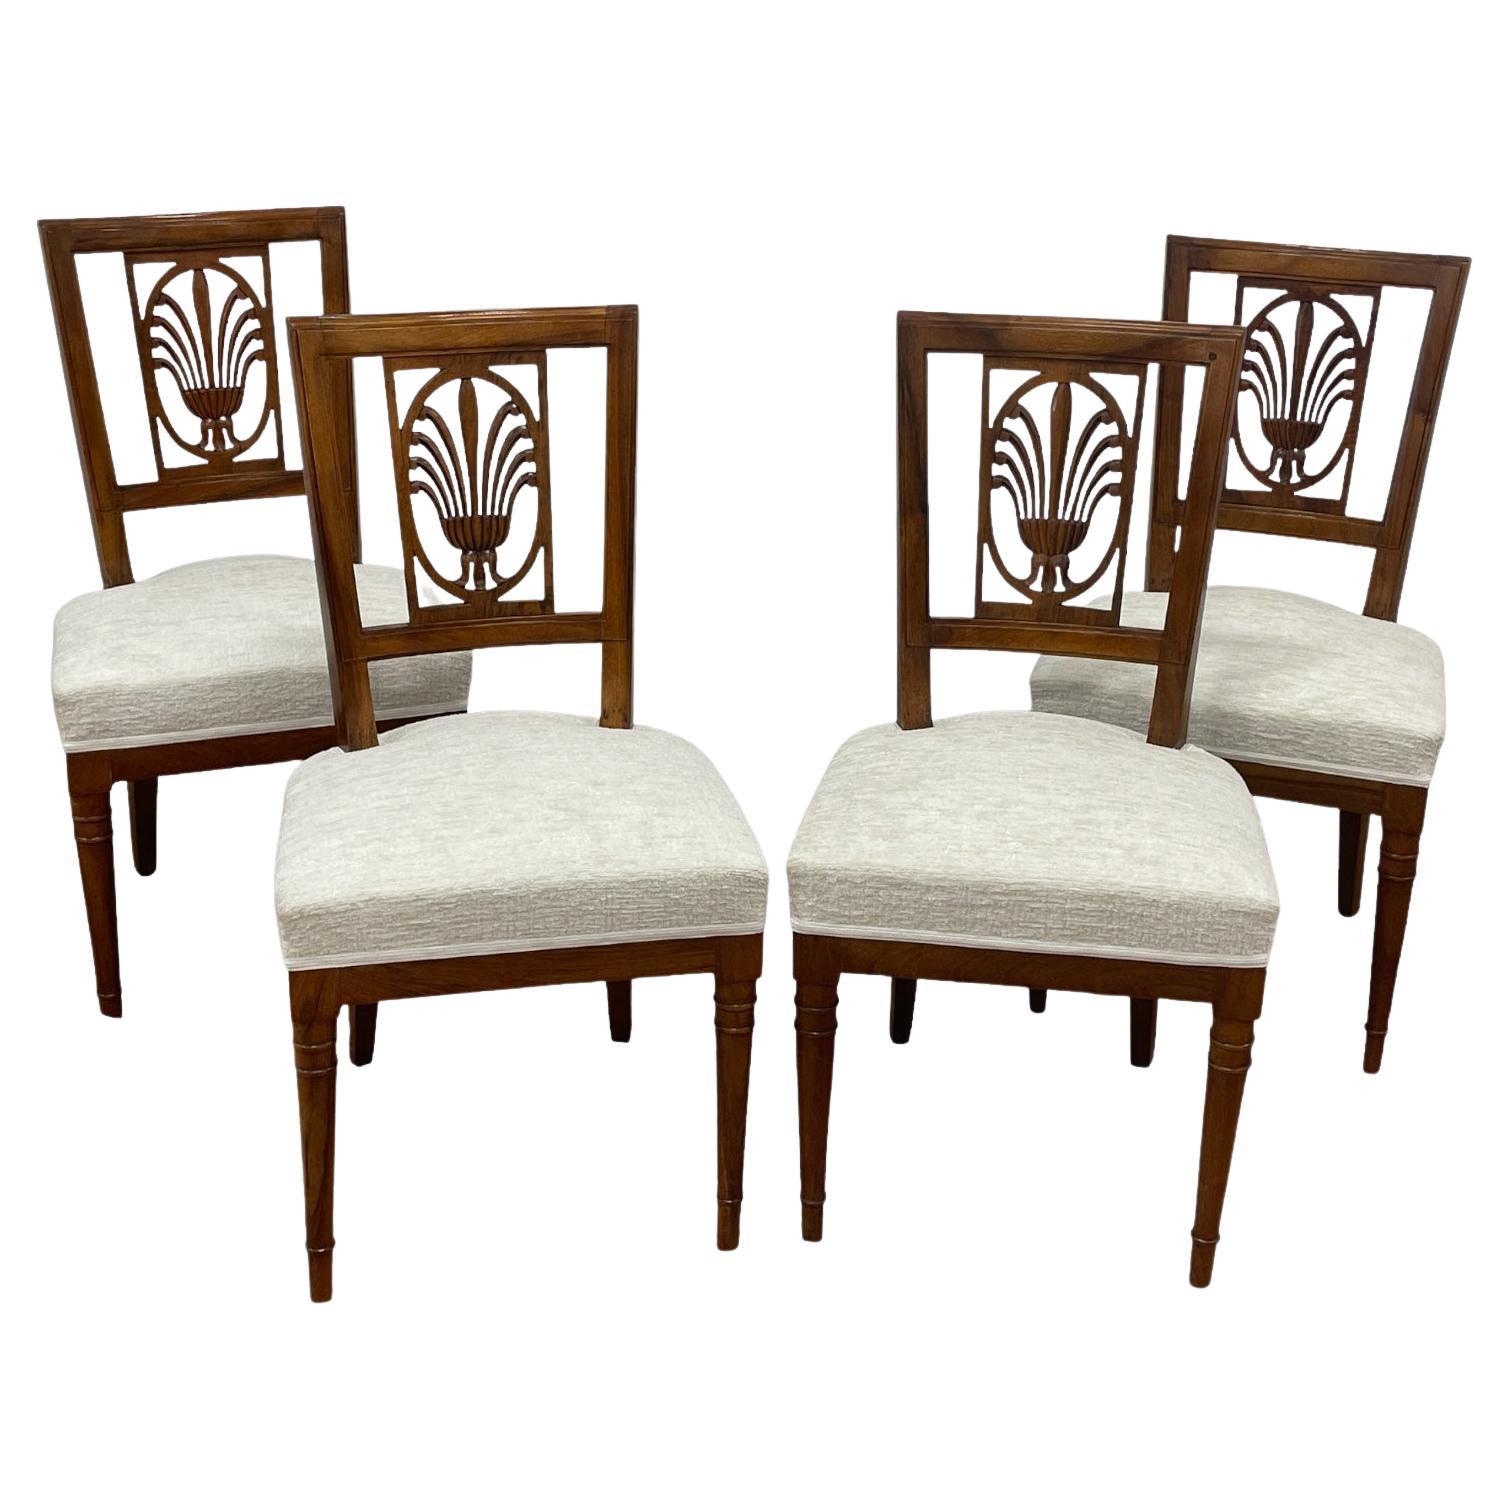 Set of 4 Louis XVI Chairs, Germany 1800, Walnut For Sale